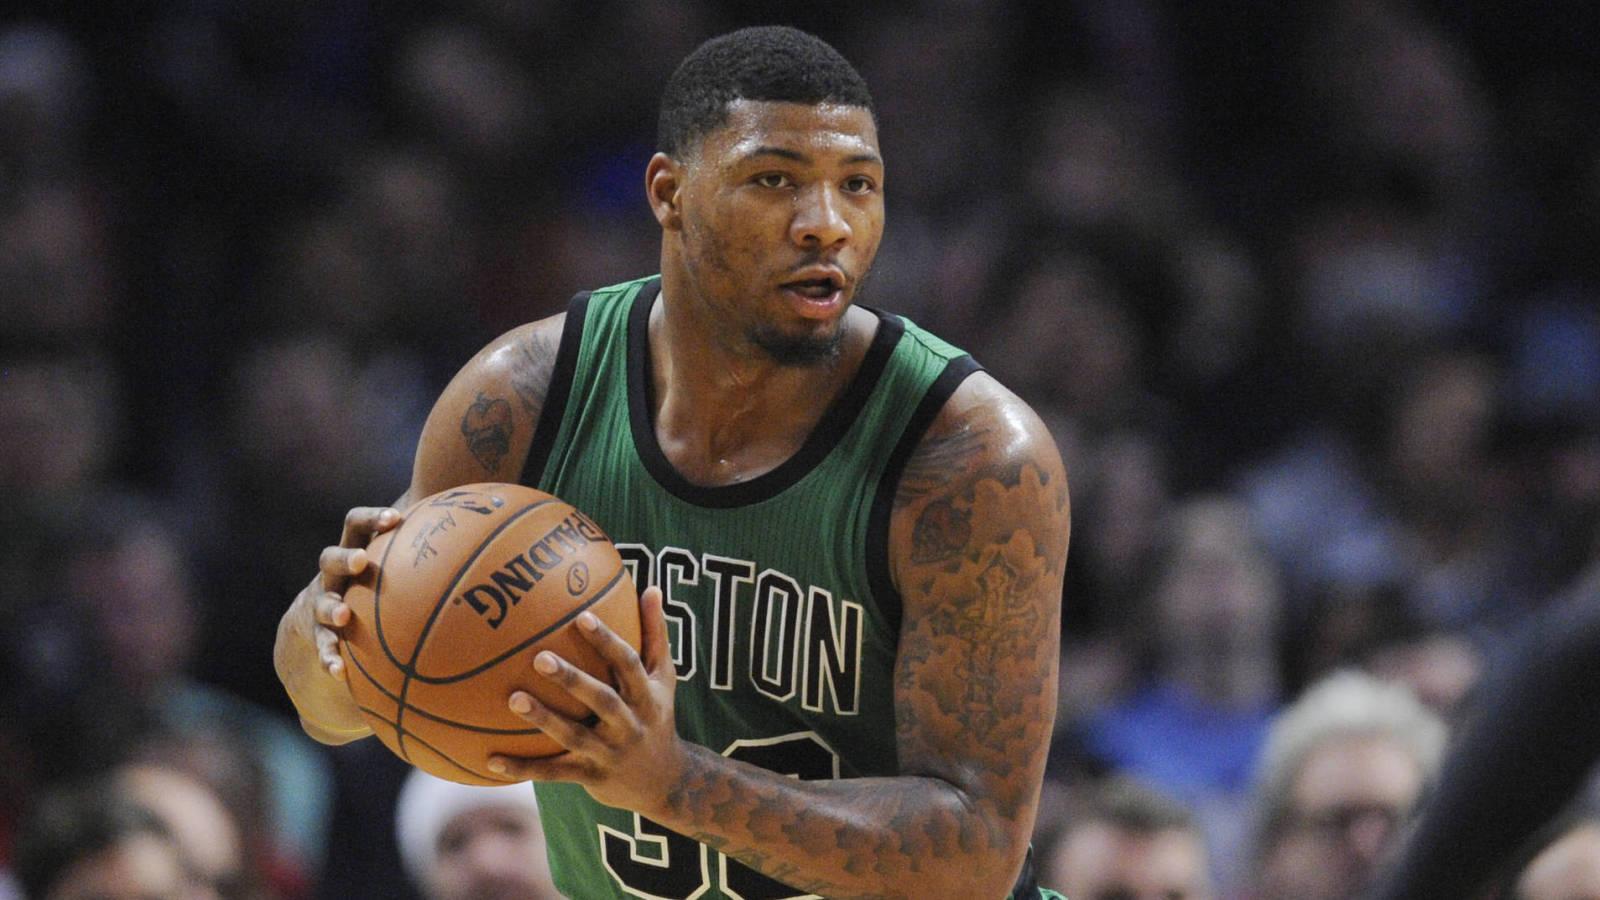 Marcus Smart angrily flips off fan during game